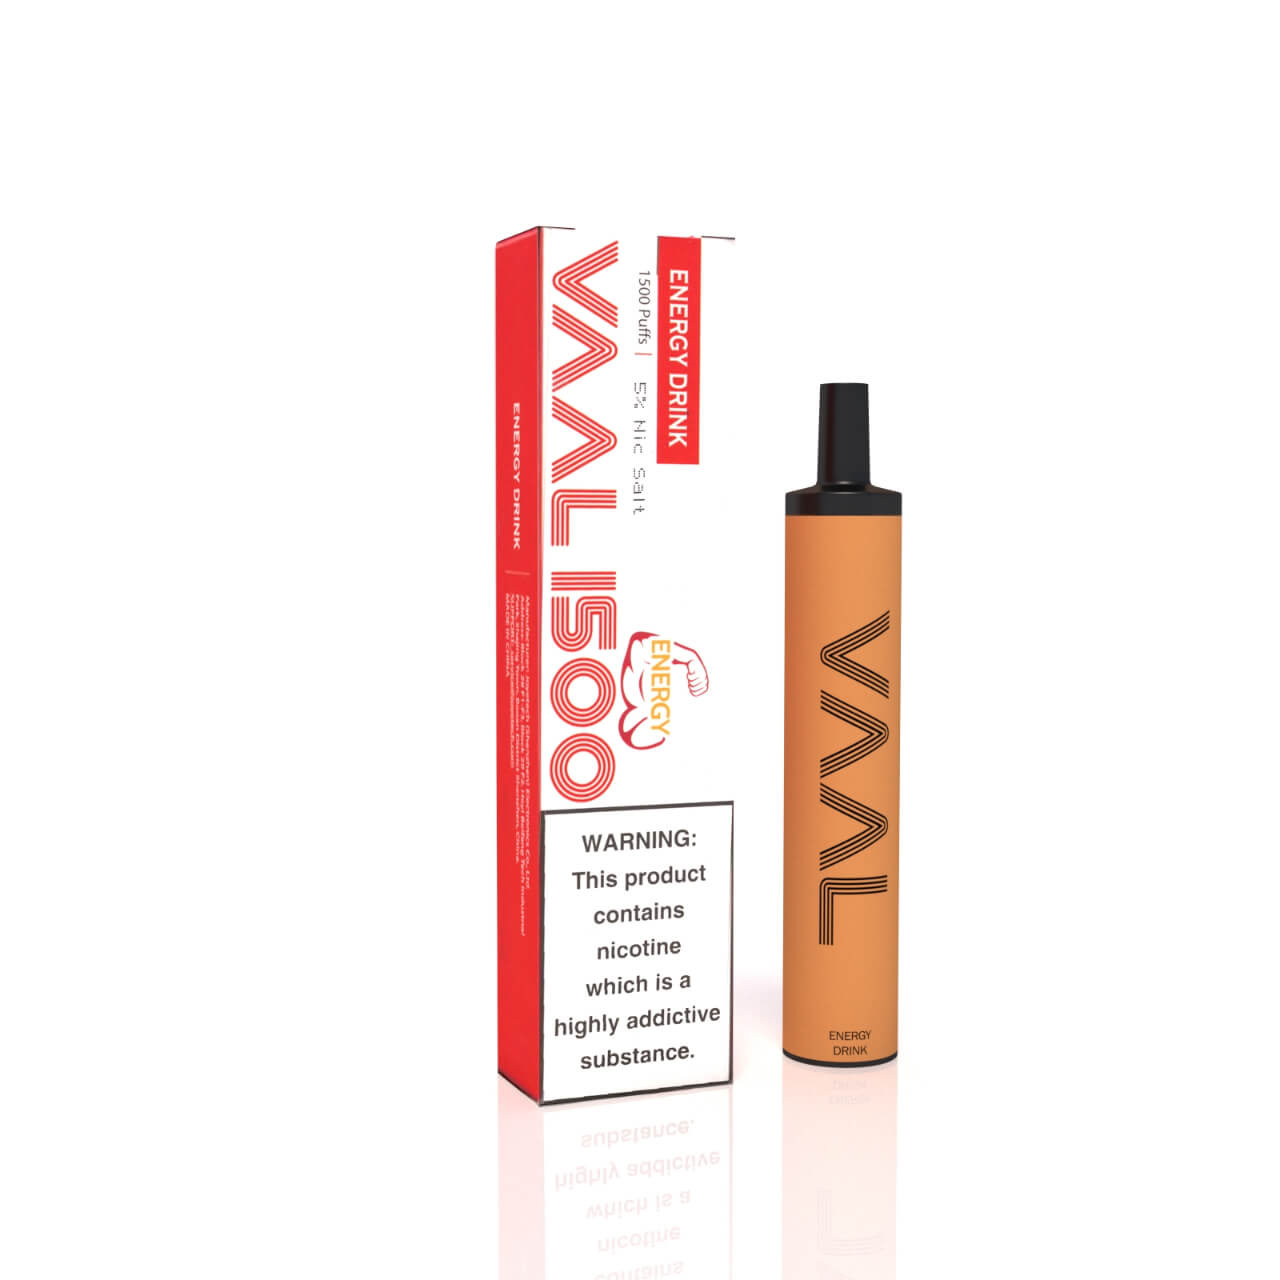 VAAL 1500 Puff Disposable-Energy Drink